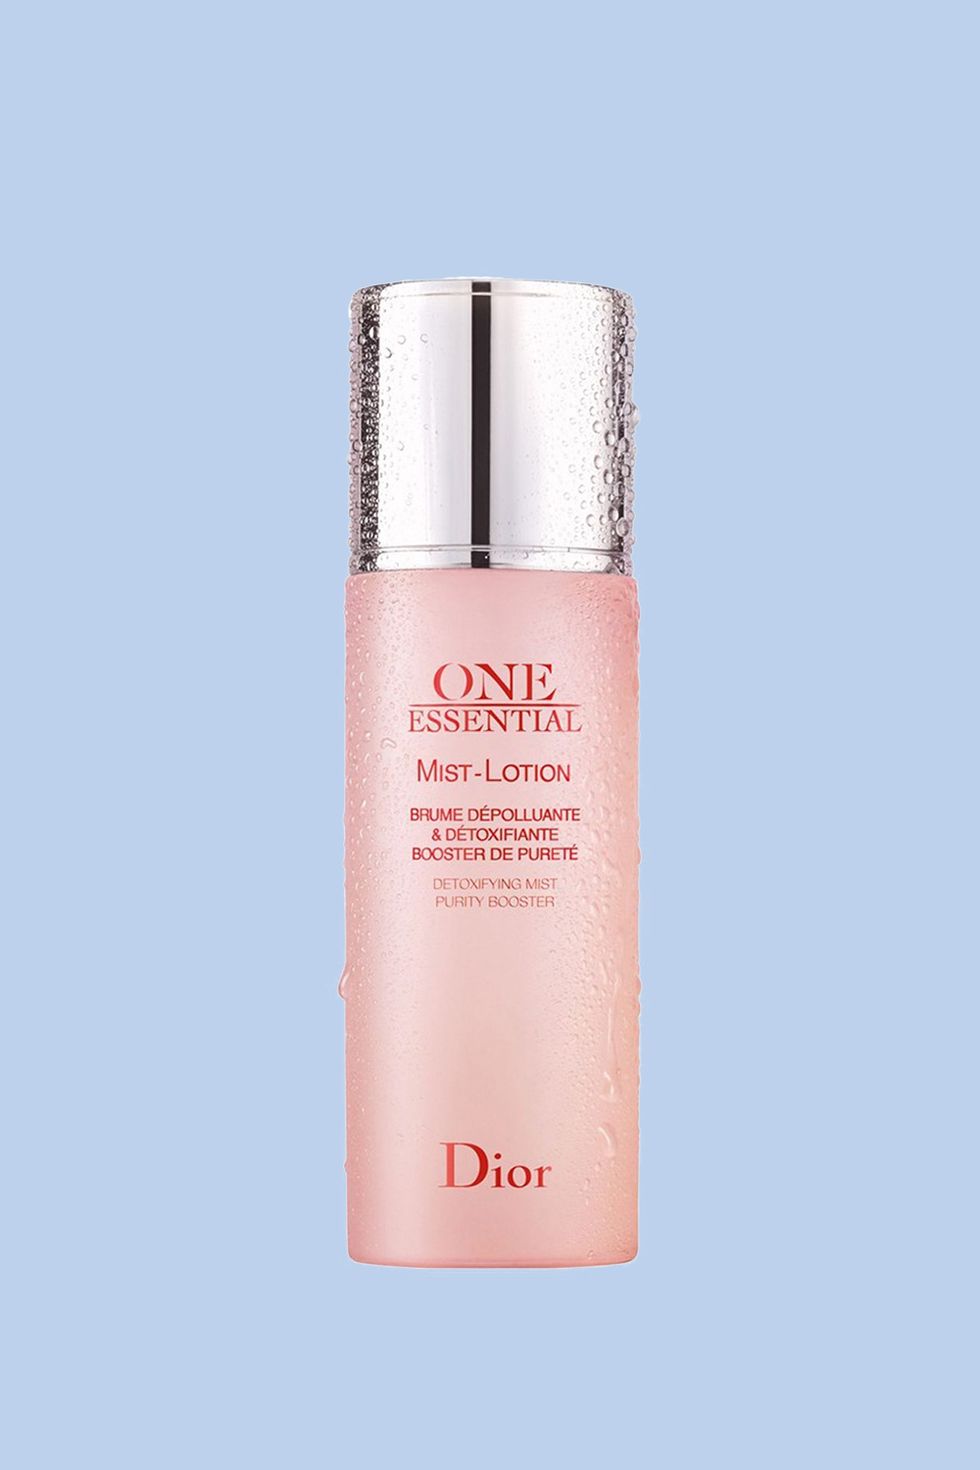 <p>Get you a mist-lotion that can do it all. This hybrid,&nbsp;air-whipped formula&nbsp;is infused with Hibiscus extract and targets 100 percent&nbsp;of particles on the skin's surface to cleanse, rebalance, and detoxify your complexion, fighting dullness and treating discoloration in one fell swoop.</p><p><br></p><p>&nbsp;Dior One Essential Mist-Lotion<span class="redactor-invisible-space" data-verified="redactor" data-redactor-tag="span" data-redactor-class="redactor-invisible-space">, $62; <a href="http://bit.ly/2cSFMJ3" target="_blank">sephora.com</a>.</span><br></p>